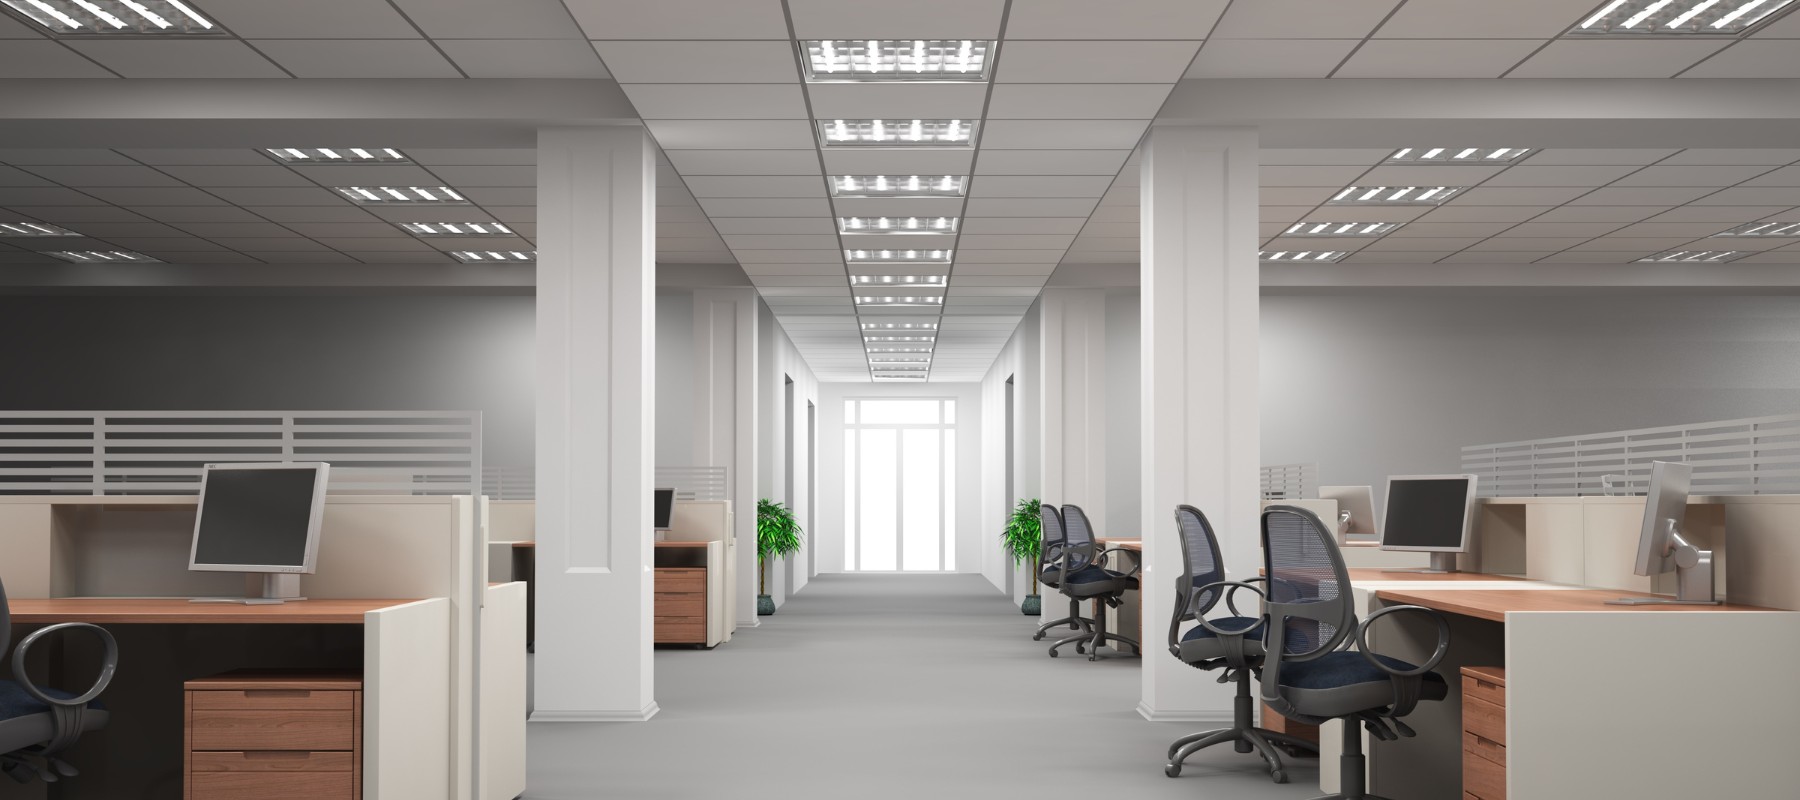 Guide to renovating your commercial space